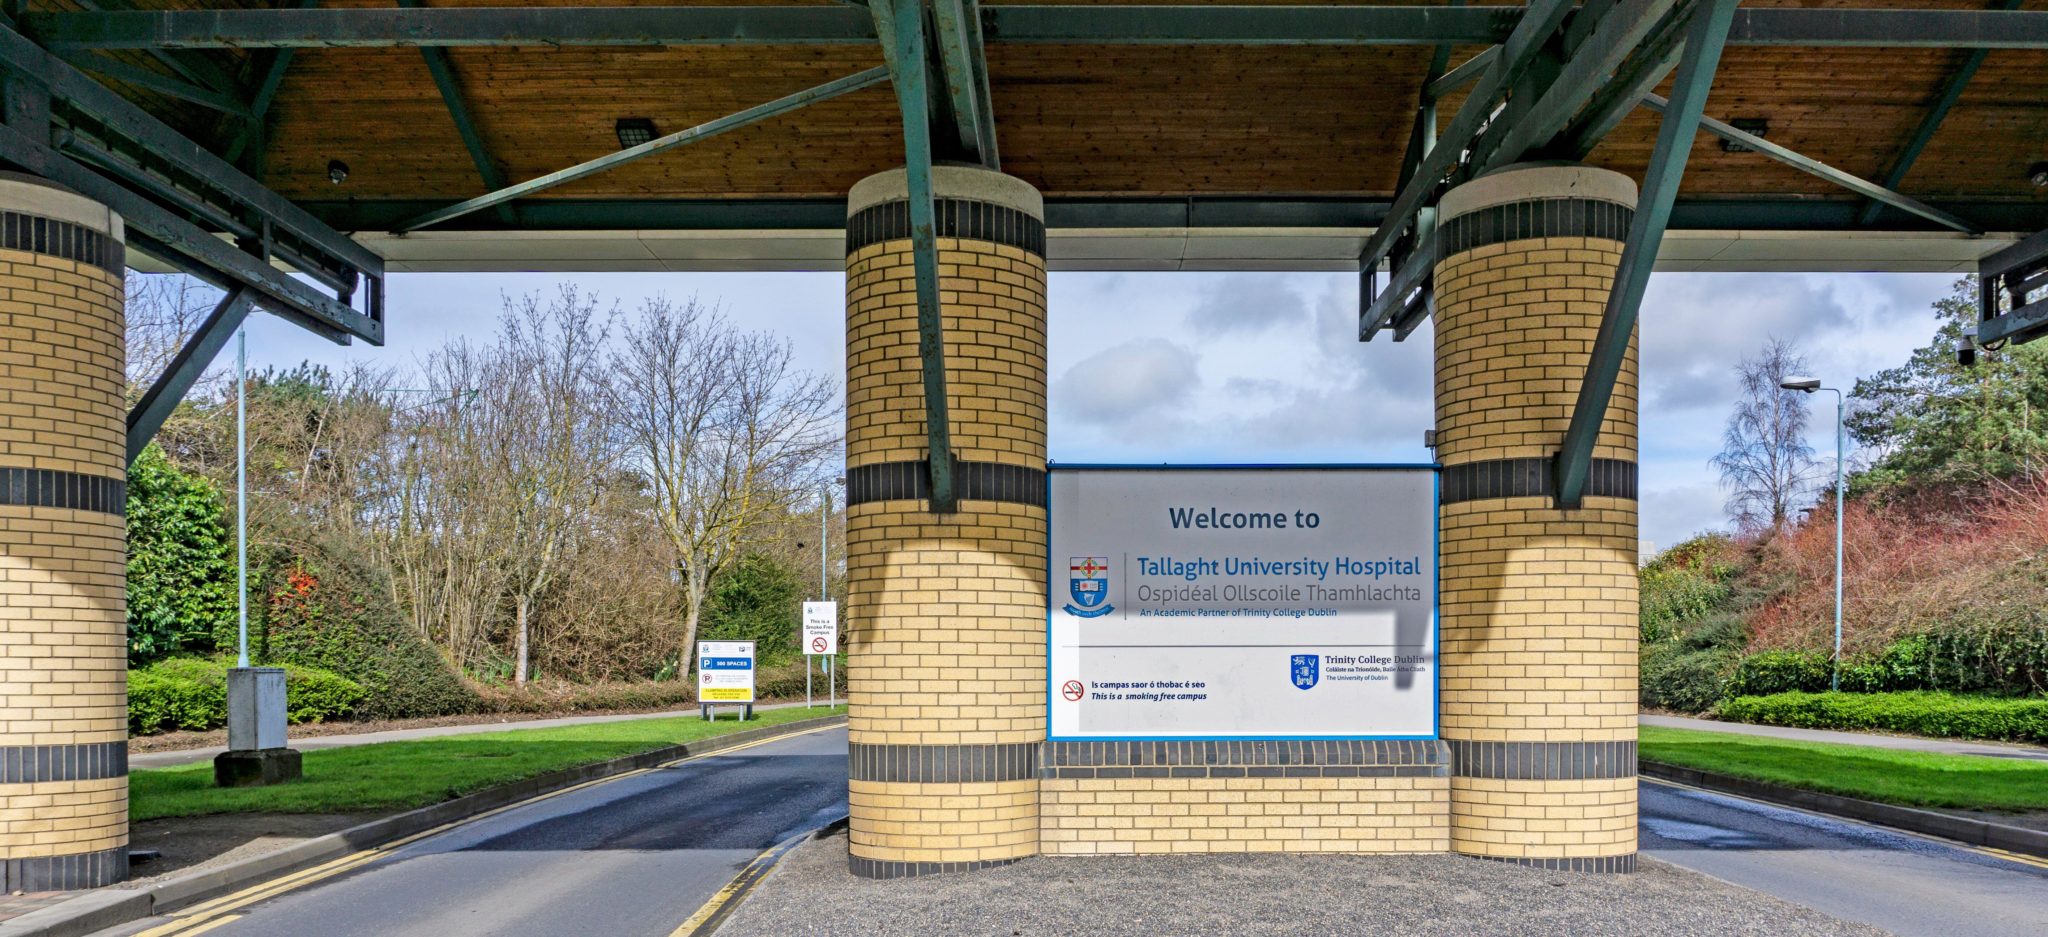 The entrance to Tallaght University Hospital, Dublin in March 2020.